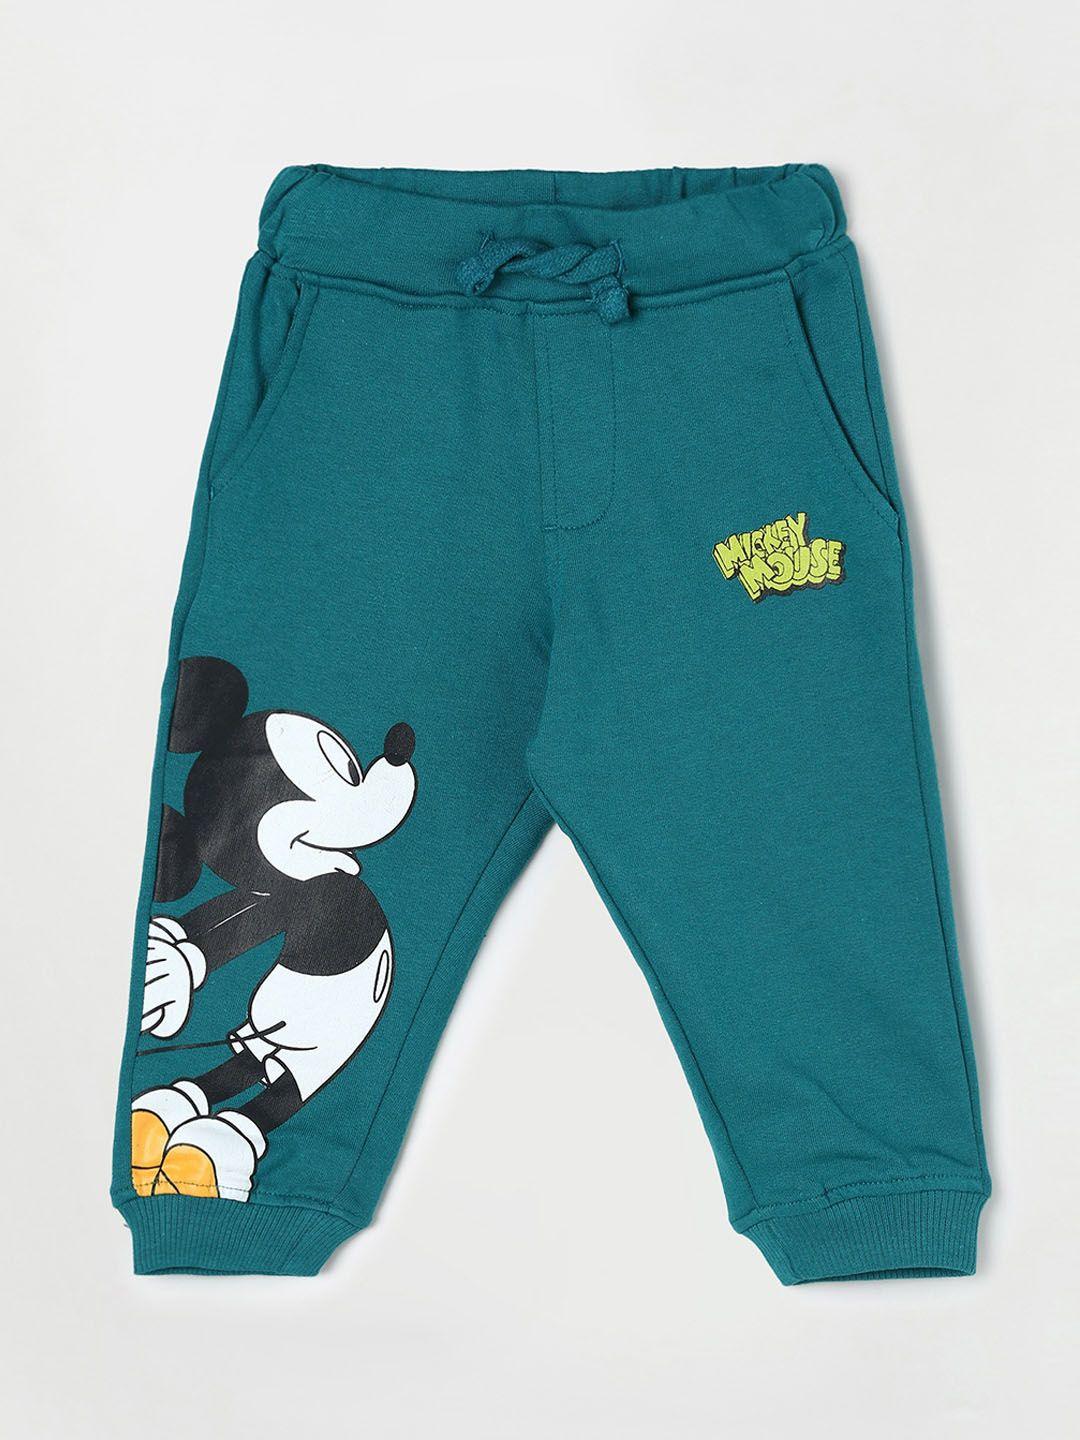 juniors-by-lifestyle-boys-teal-blue-mickey-mouse-printed-cotton-joggers